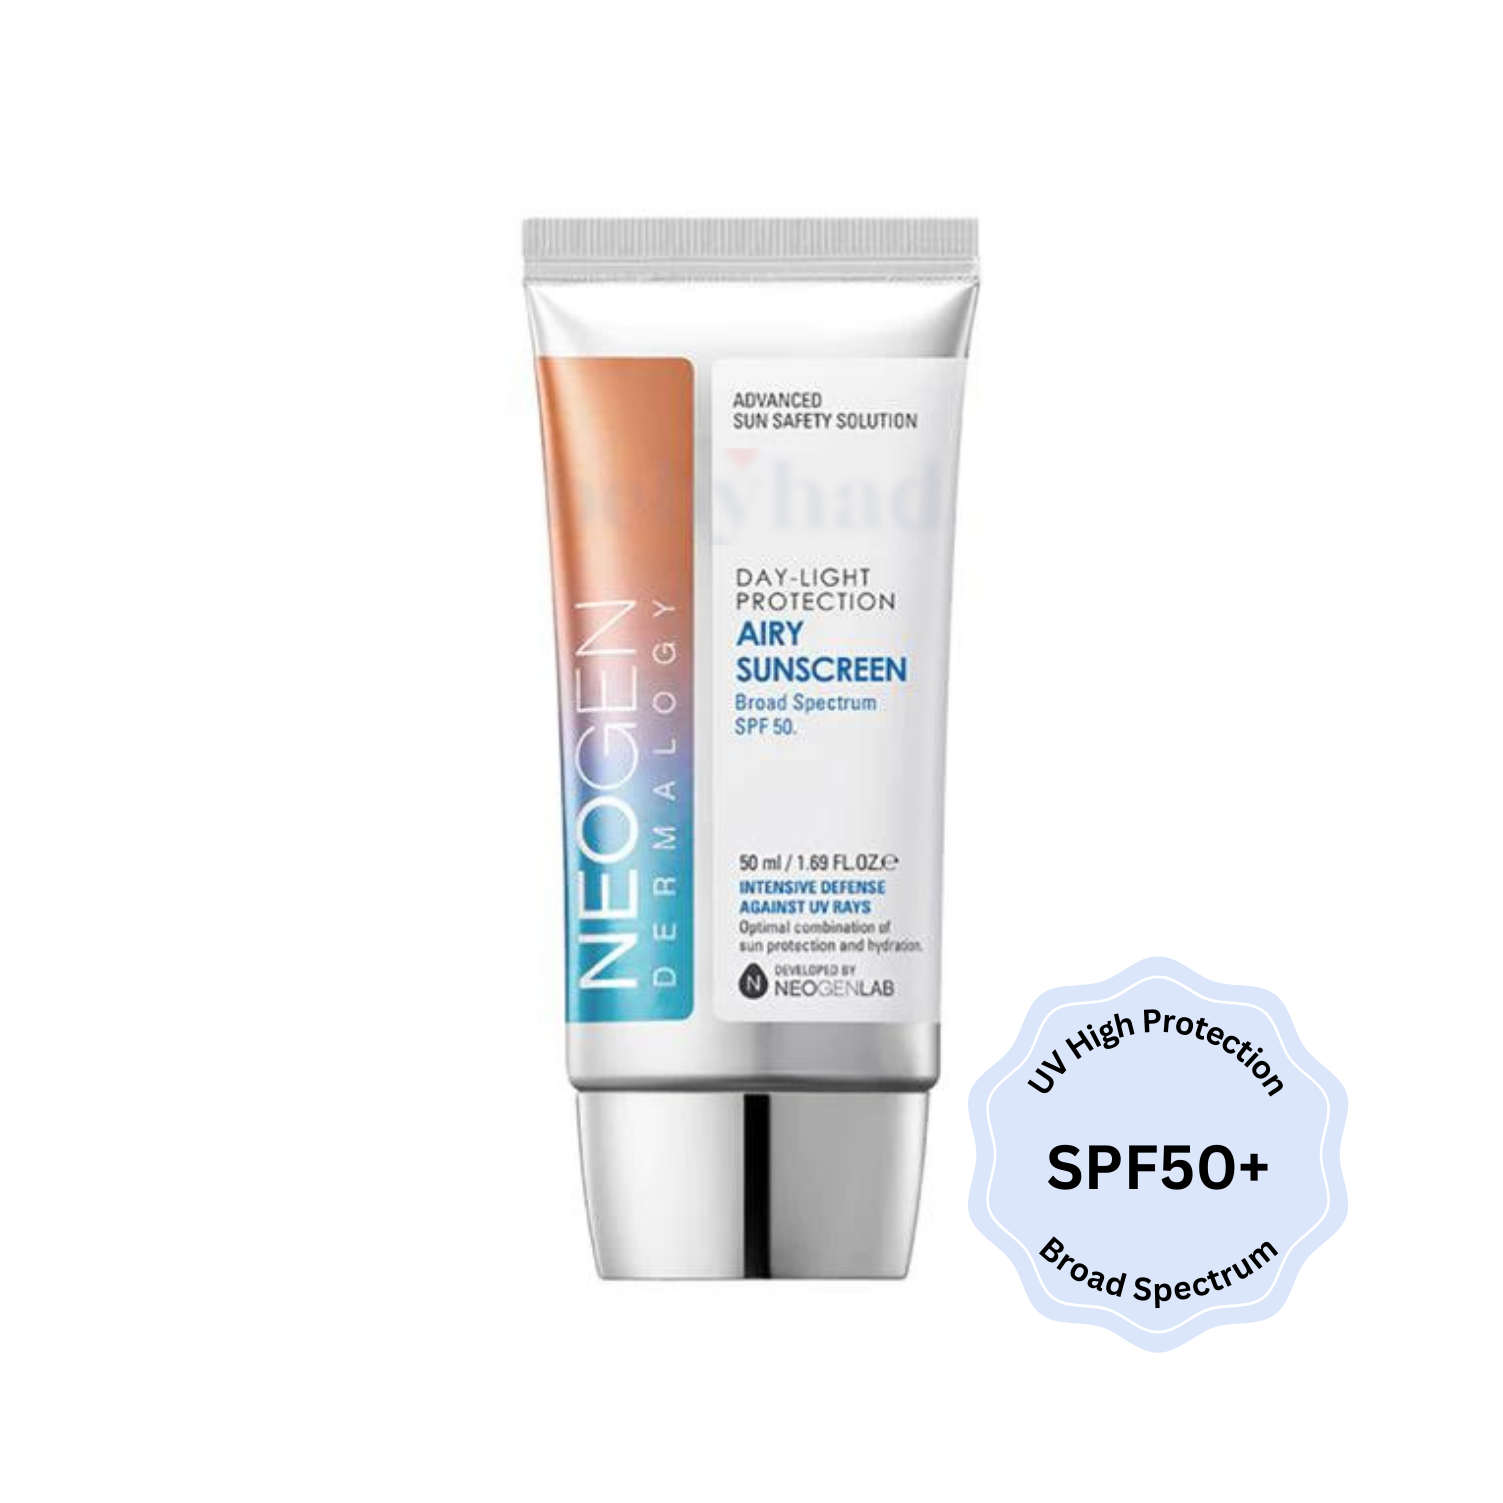 Dermalogy Day-Light Protection Airy Sunscreen SPF50+ Broad Spectrum